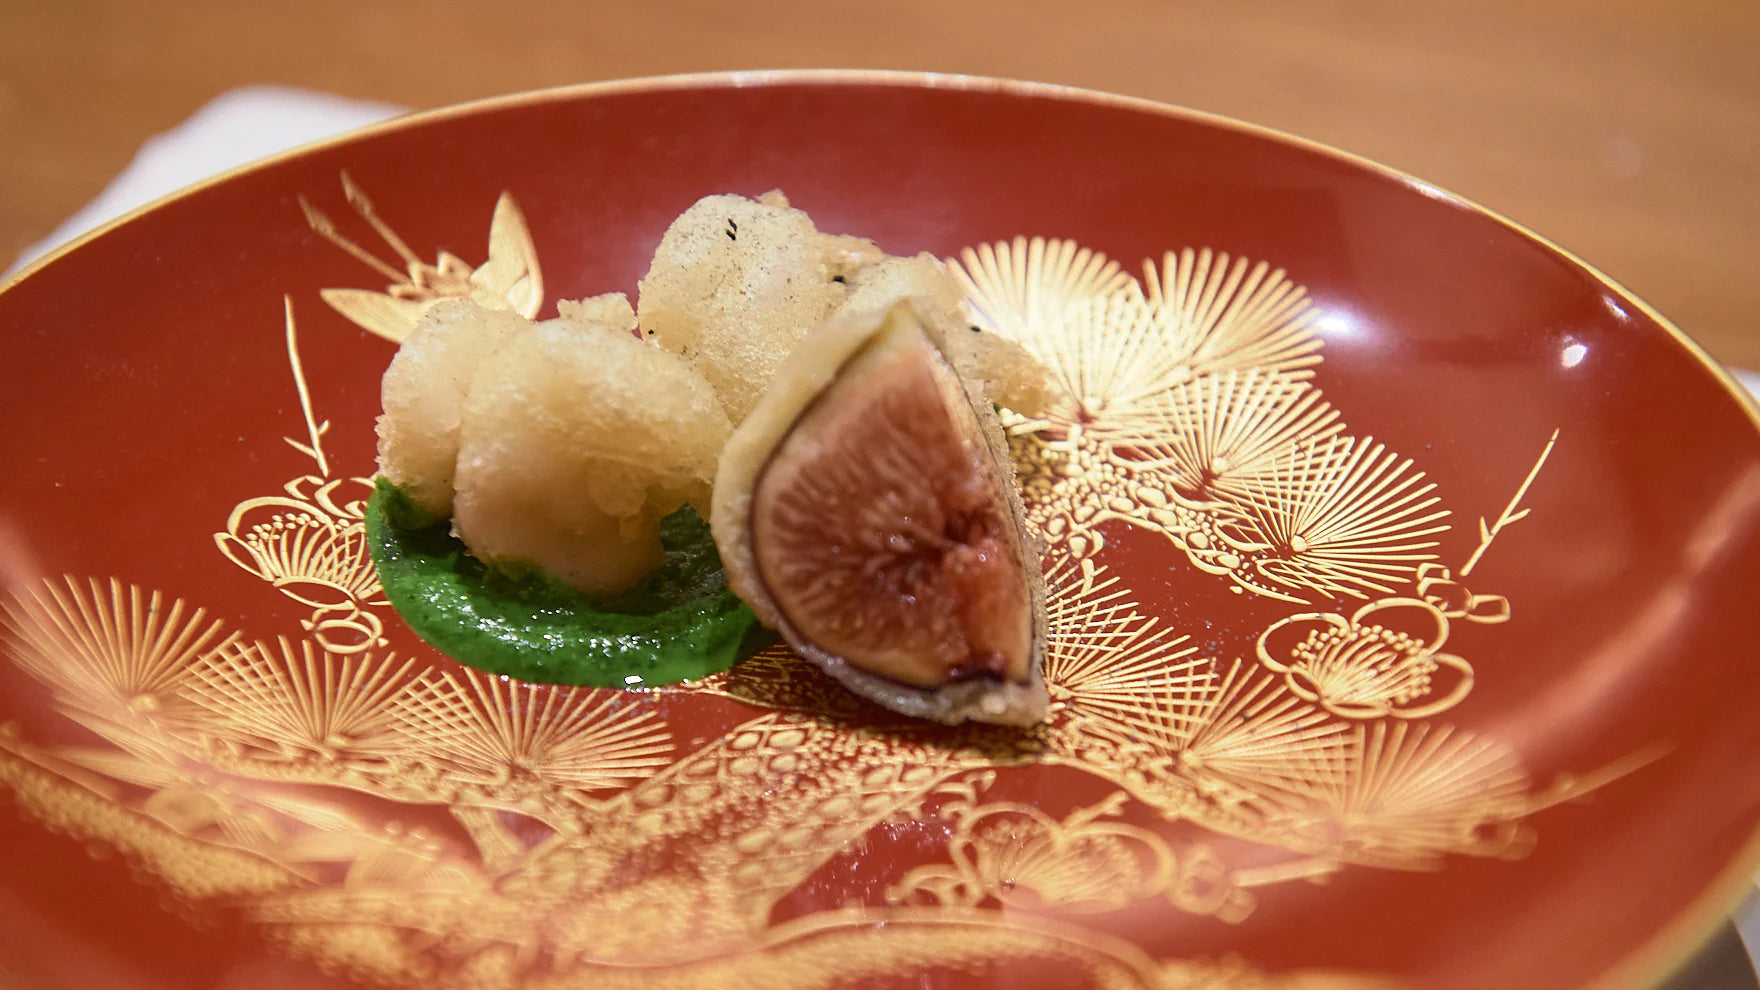 Crafeat: Tasting the Tradition of Japanese Artistry and Cuisine, Part 2  